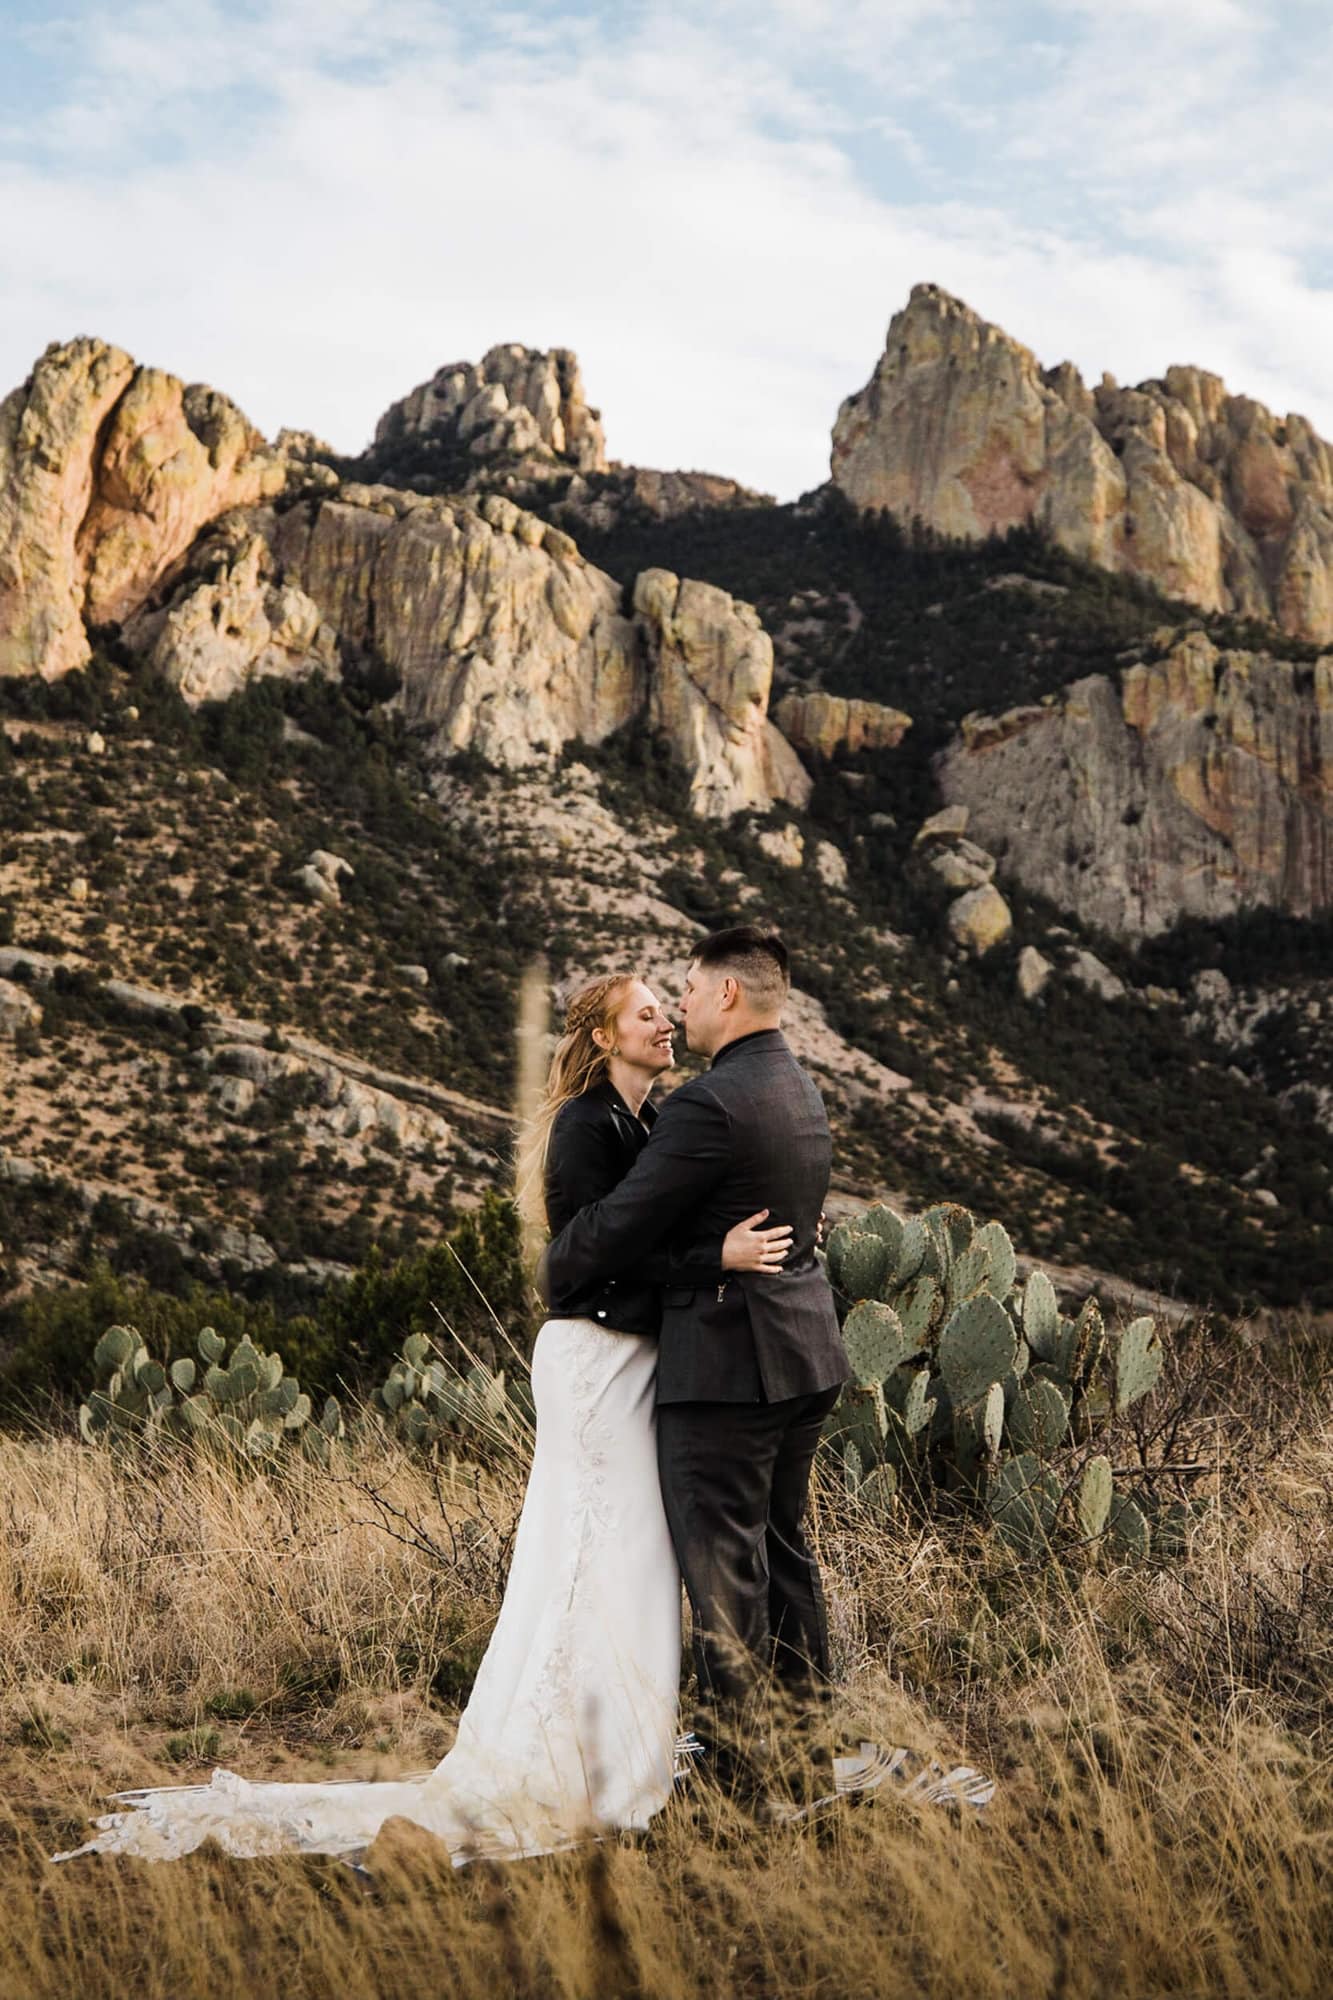 This sweet camping wedding in Eastern Arizona was a wedding exactly the way this couple wanted- simple, beautiful, and relaxed. See their whole story here. 